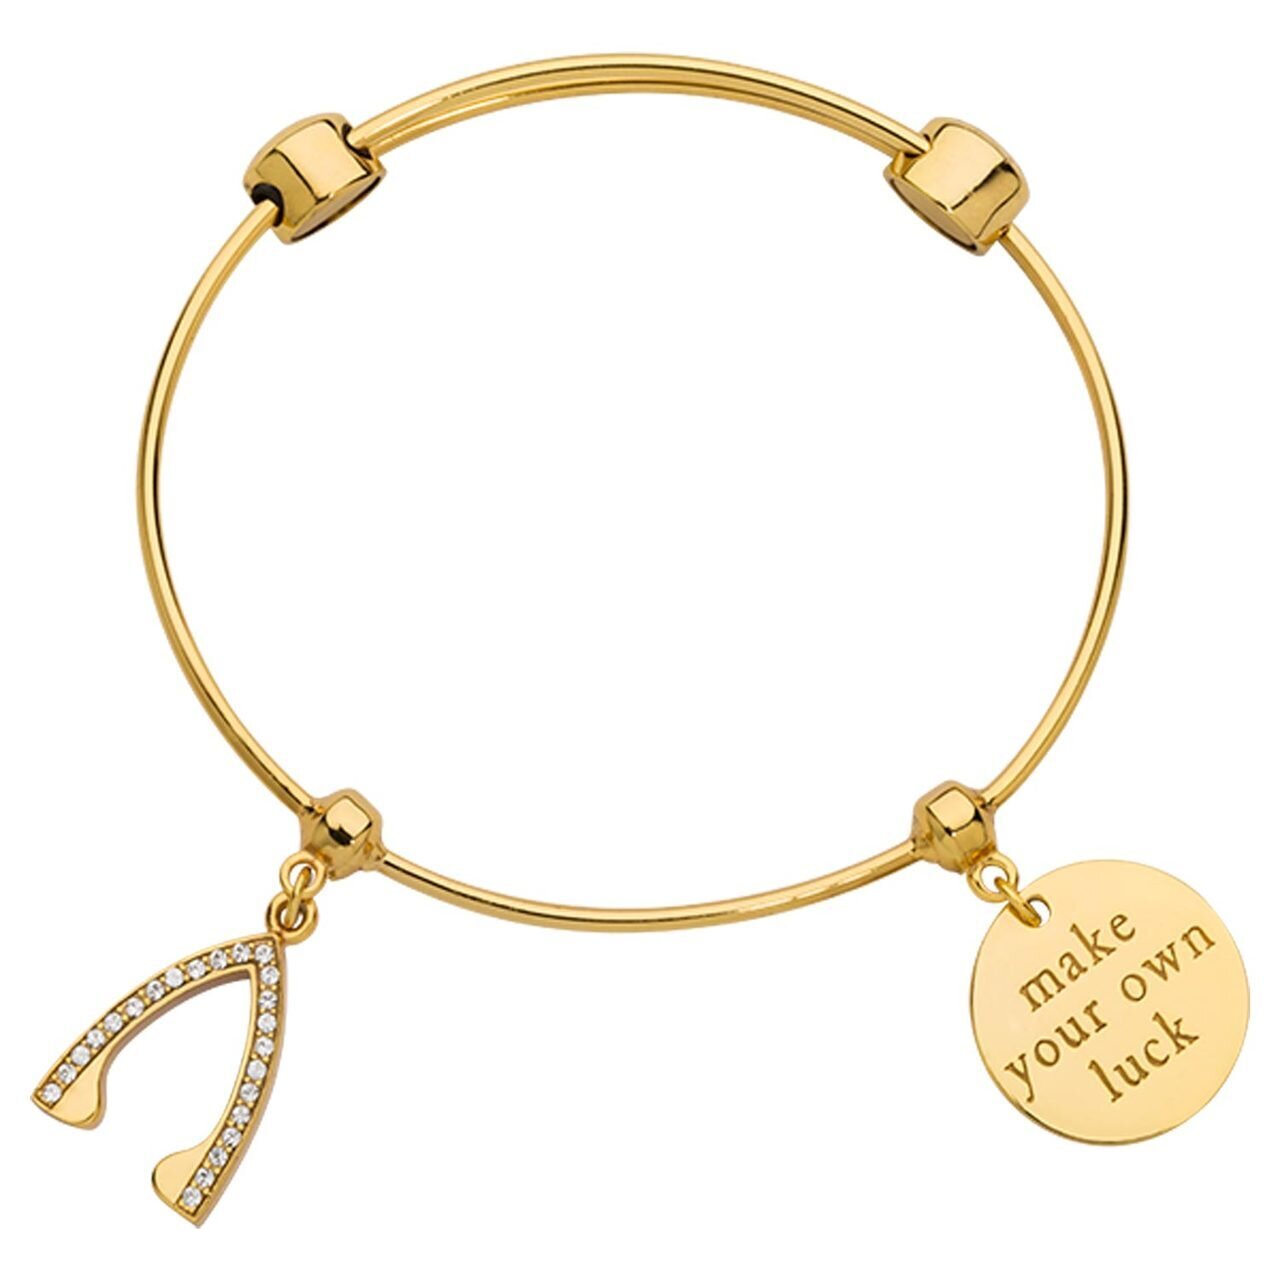 Nikki Lissoni Charm Bangle with Two Fixed Charms Wishbone Make Your Own Luck Gold-plated 17cm B1156G17